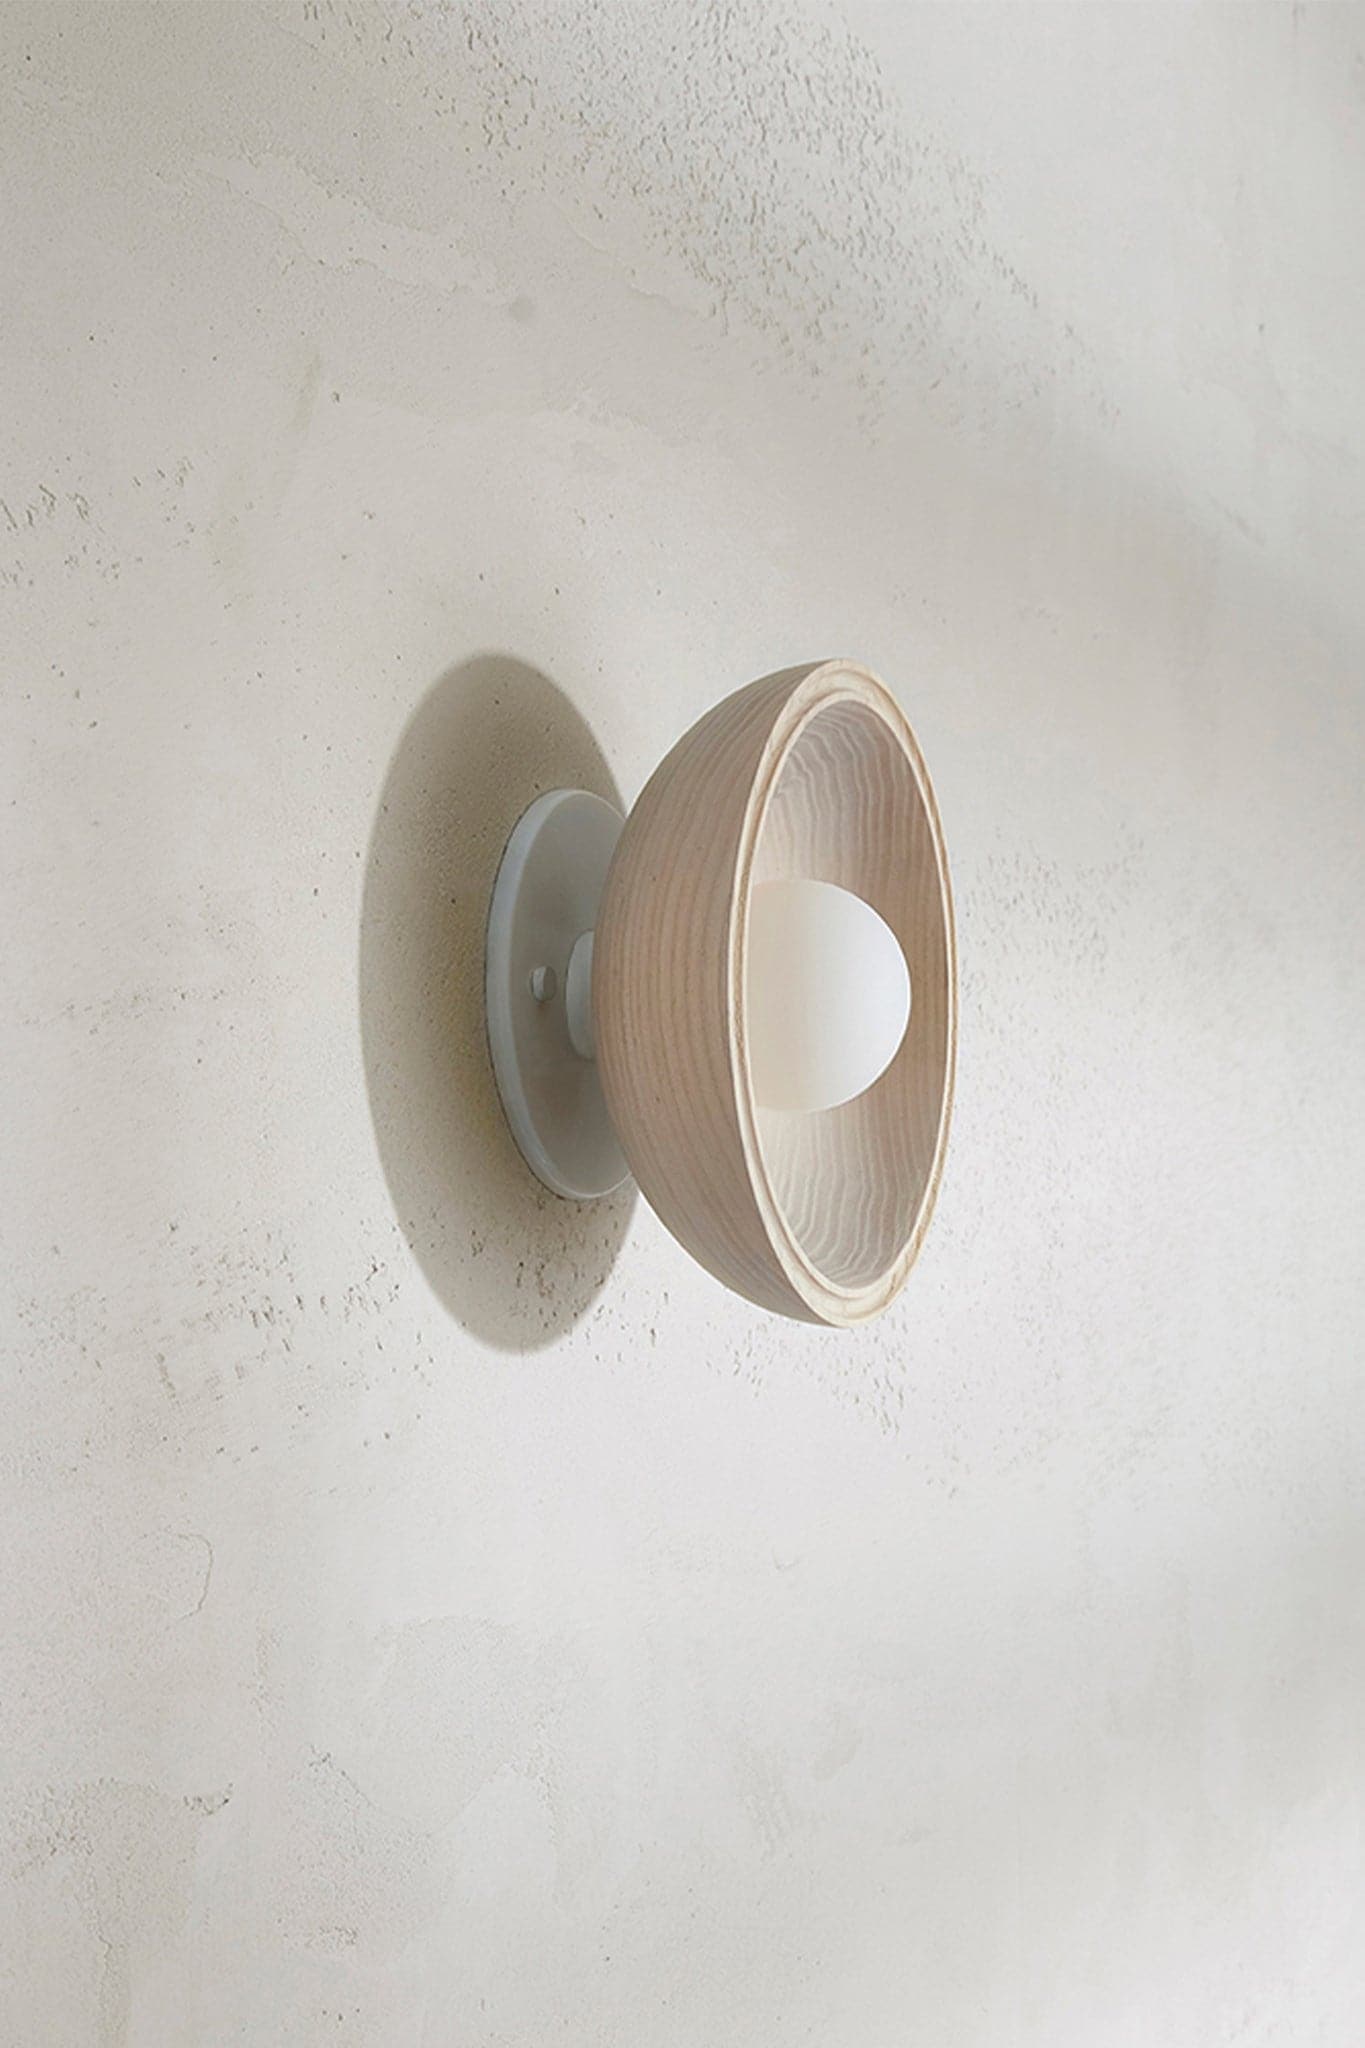 Marz Designs - Selene Surface Sconce Small in White Satin/Bleached Ash